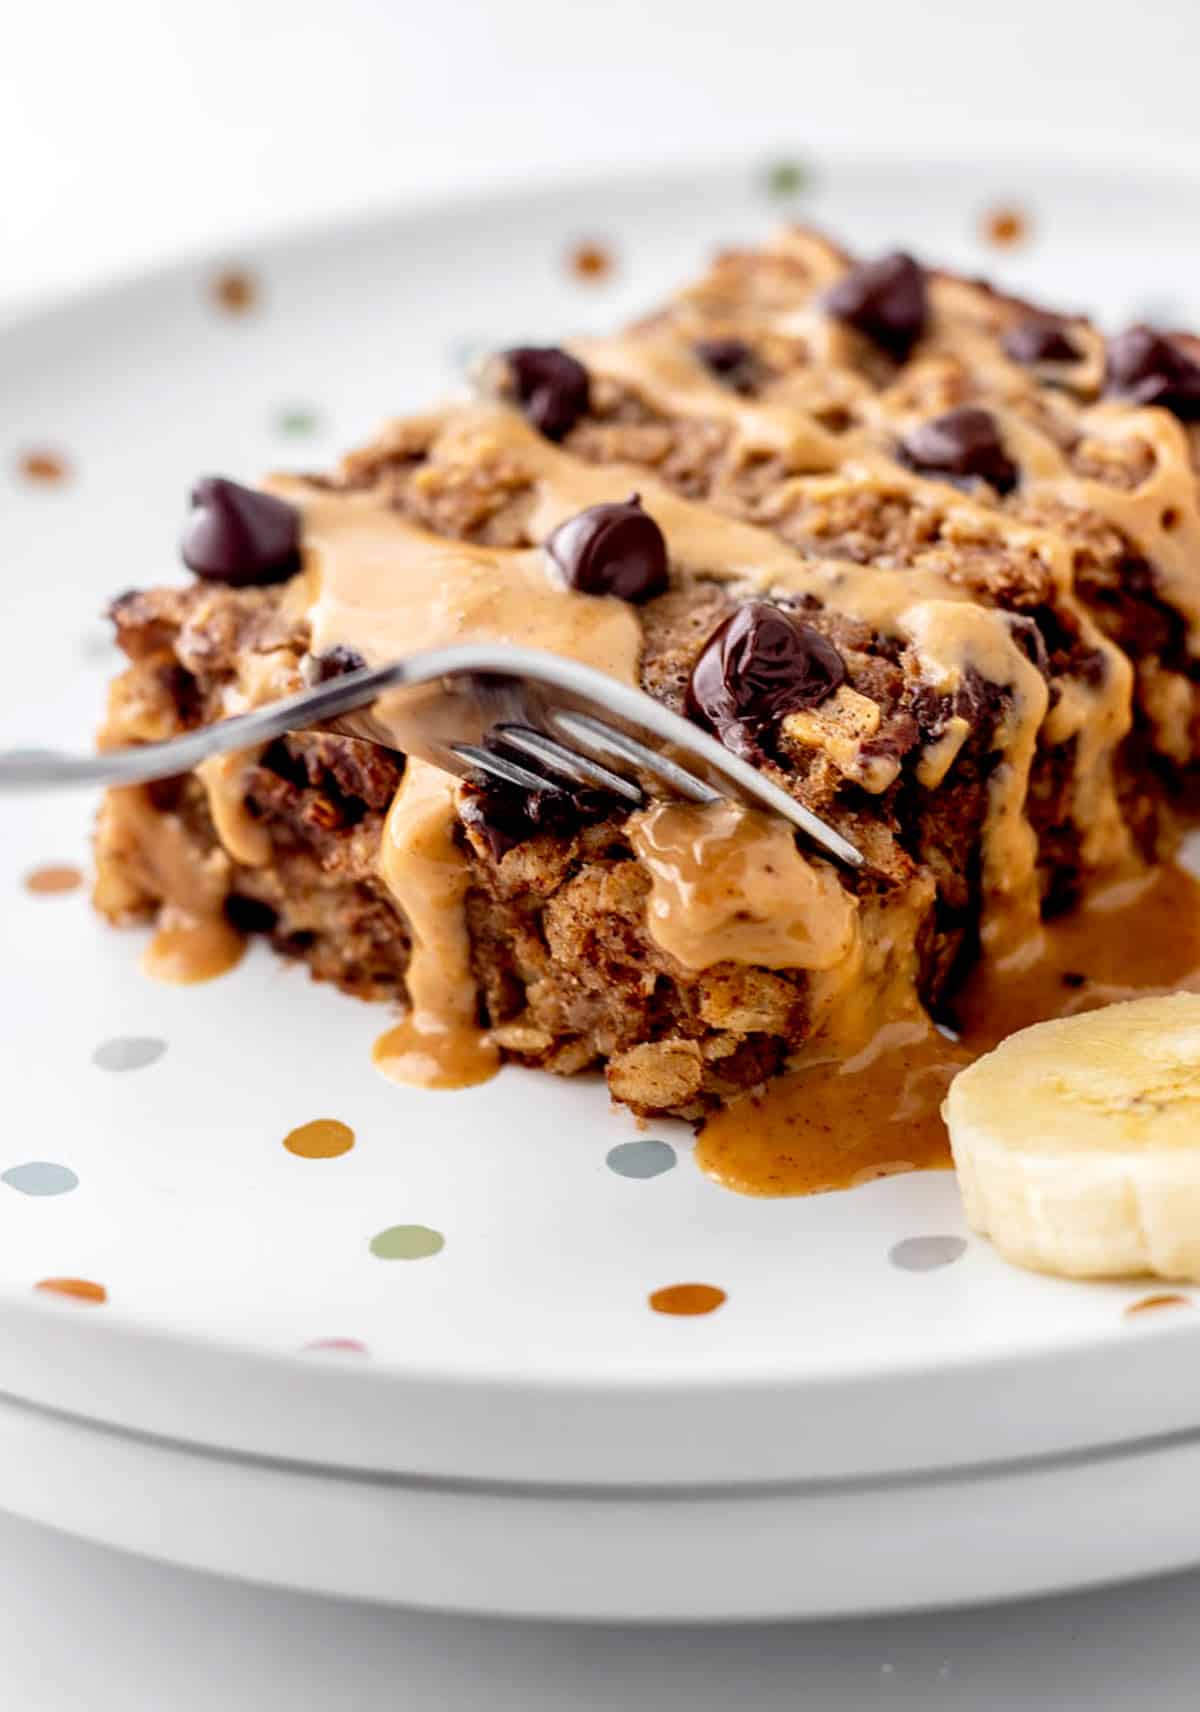 A fork digging into a piece of baked oatmeal with chocolate chips, topped with a drizzle of peanut butter.